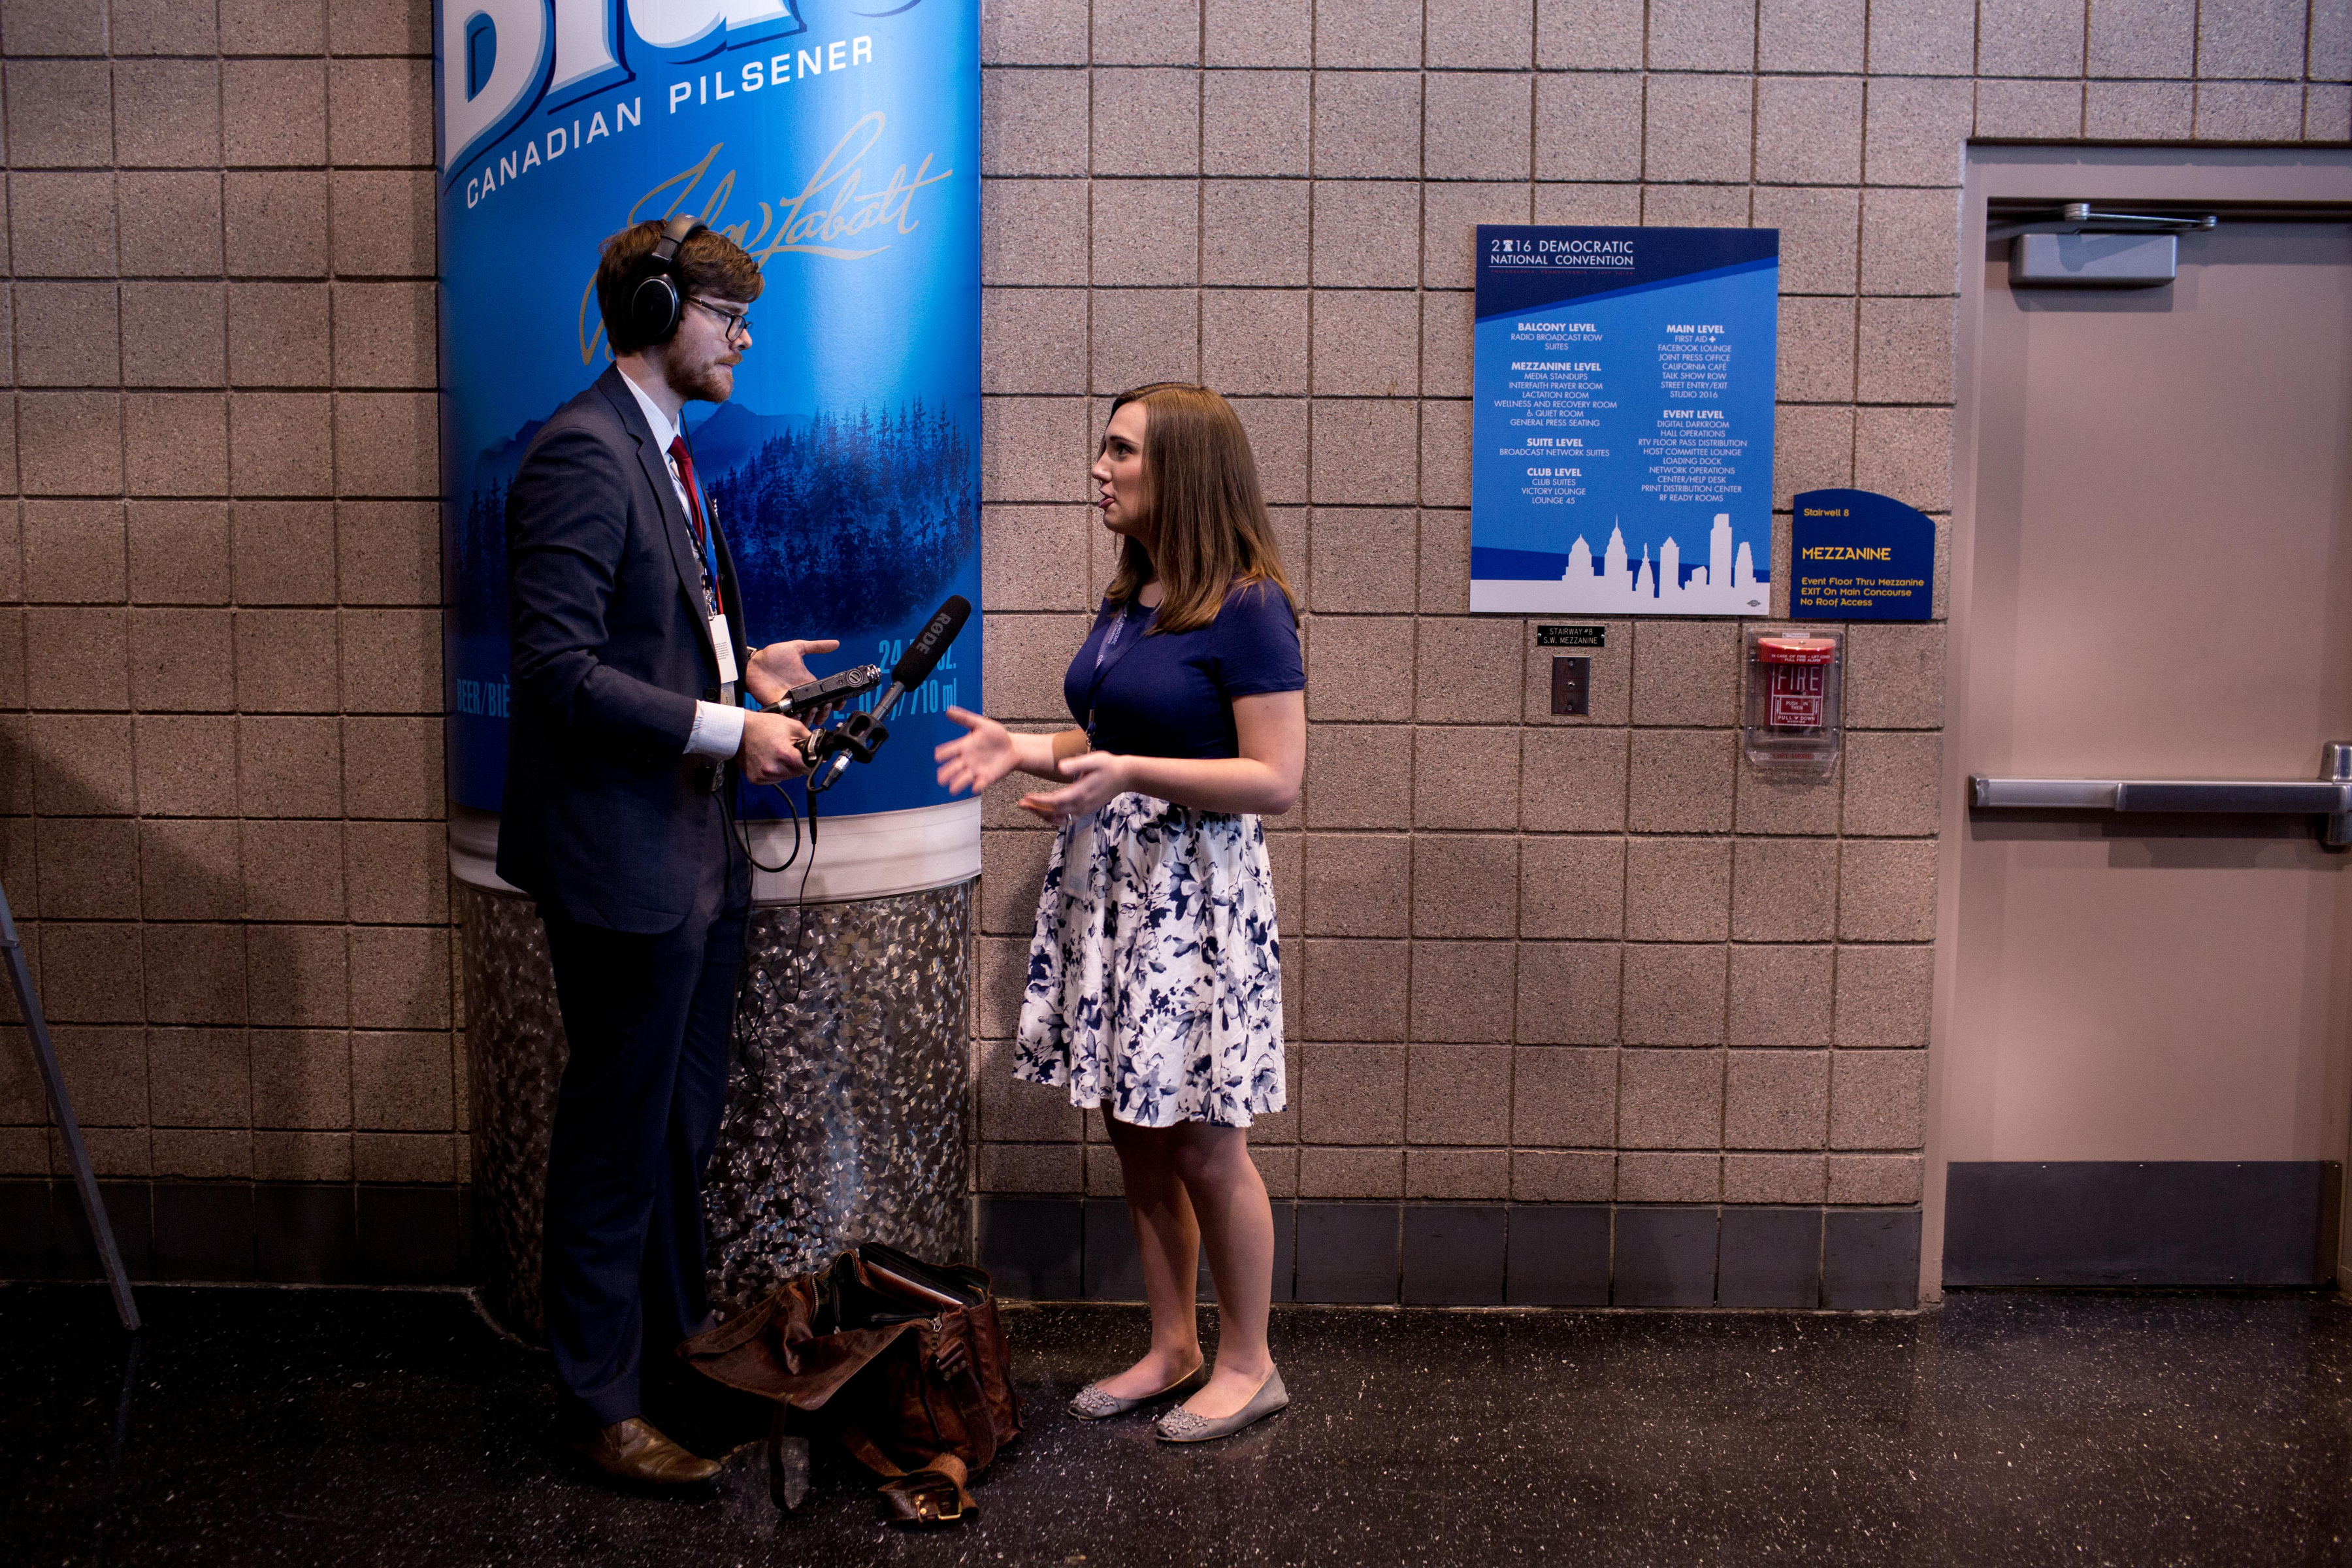 Sarah McBride is interviewed by a radio journalist at the Wells Fargo Center where she is attending Democratic National Convention on July 25, 2016 in Philadelphia. (Natalie Keyssar for TIME)